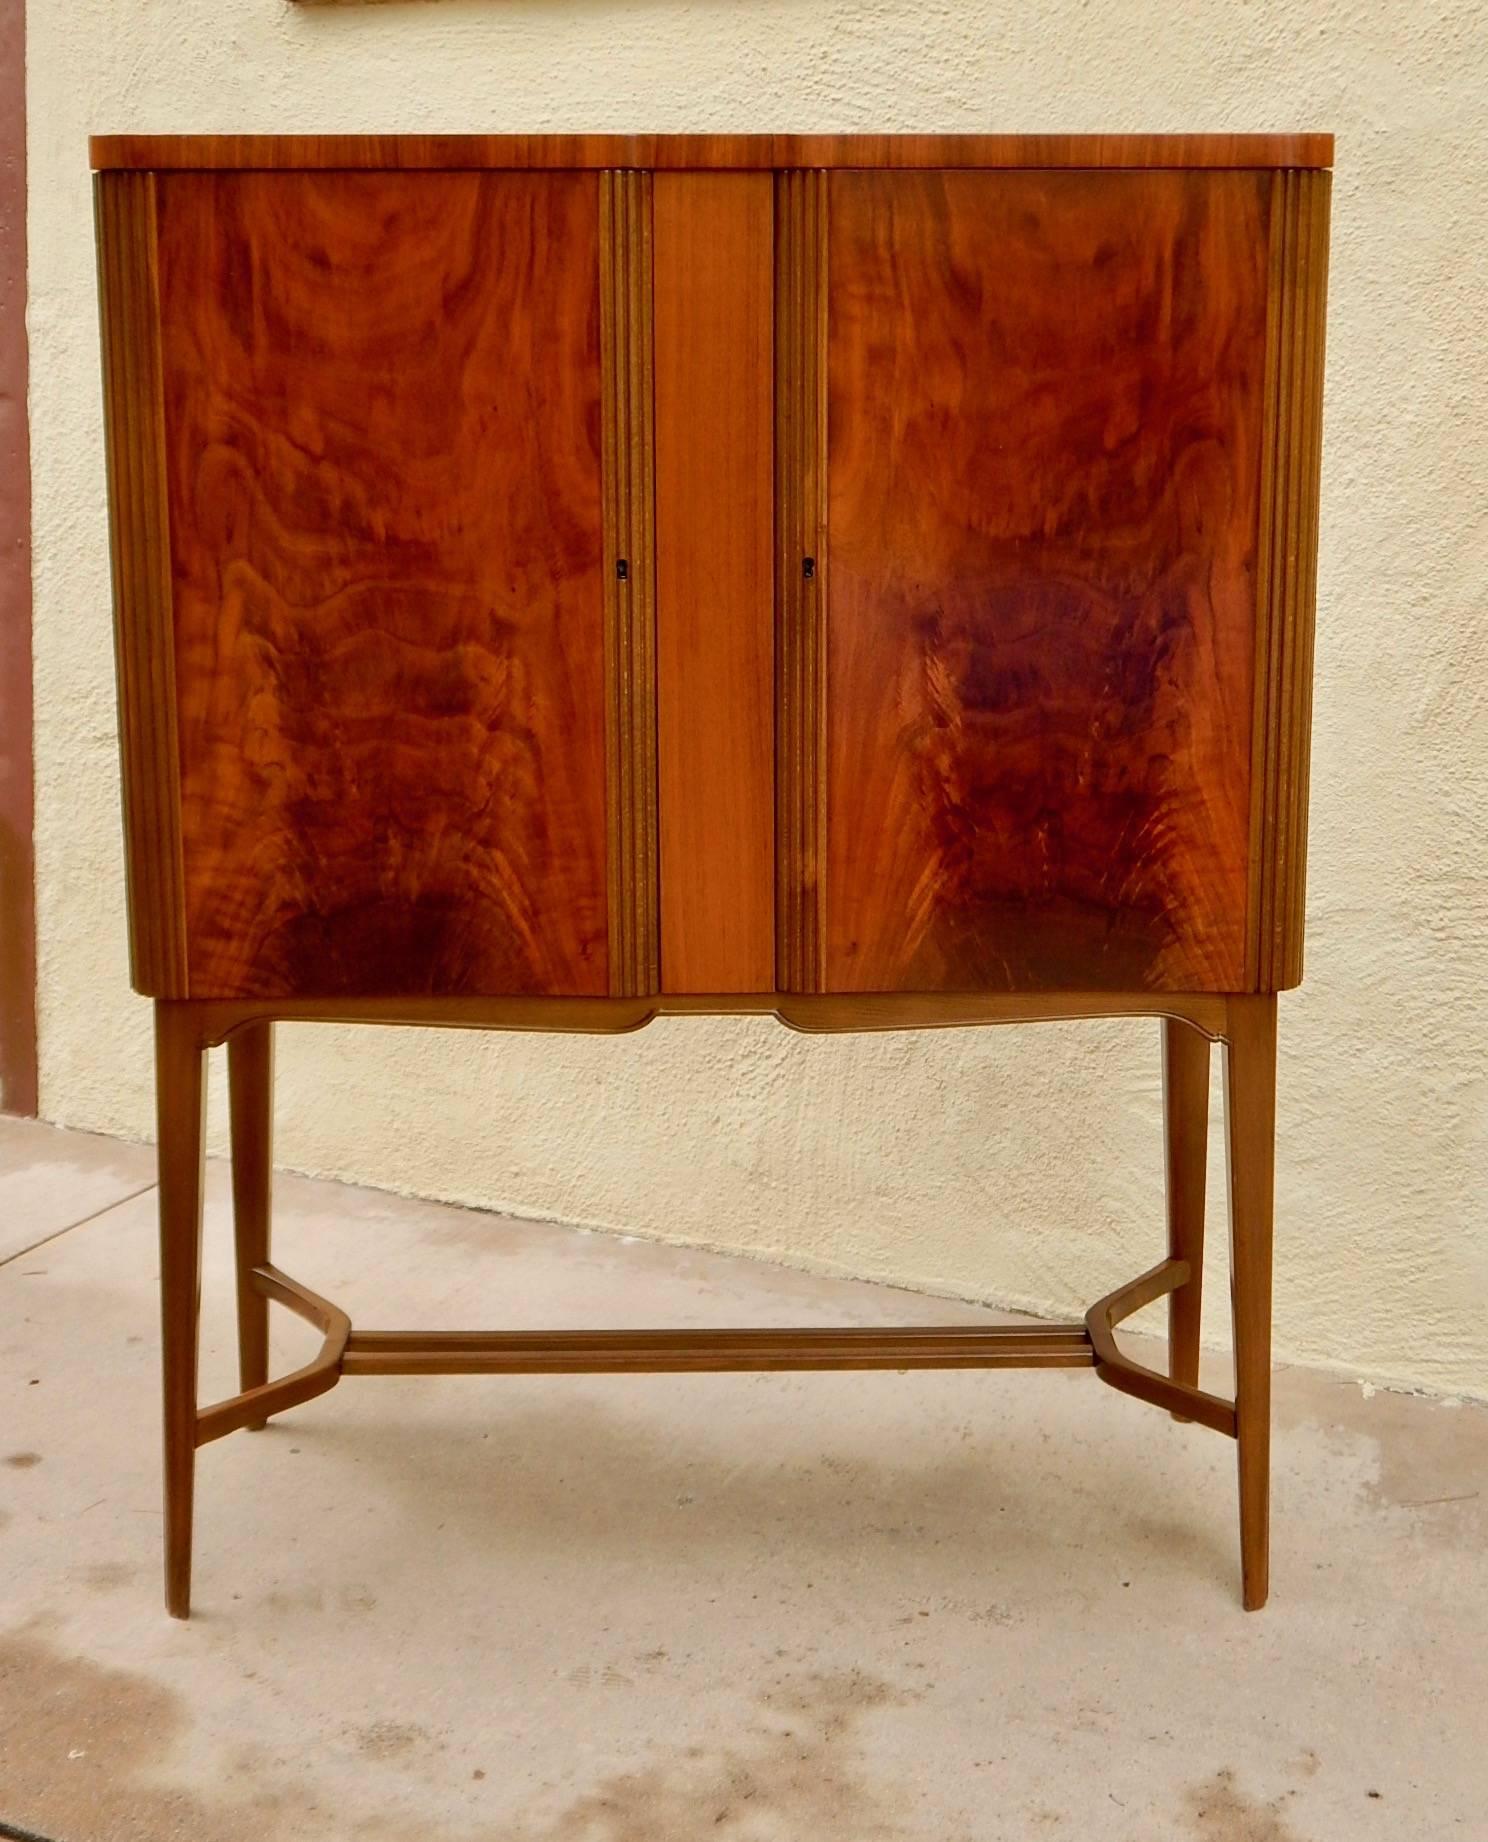 Swedish art moderne bar cabinet by Reimer's Möbler, Mjölby. Rendered in highly figured Santo Domingo mahogany. Interior is composed of adjustable shelves and some of the most beautiful drawers we have ever seen. Date stamped 1948. With maker's stamp